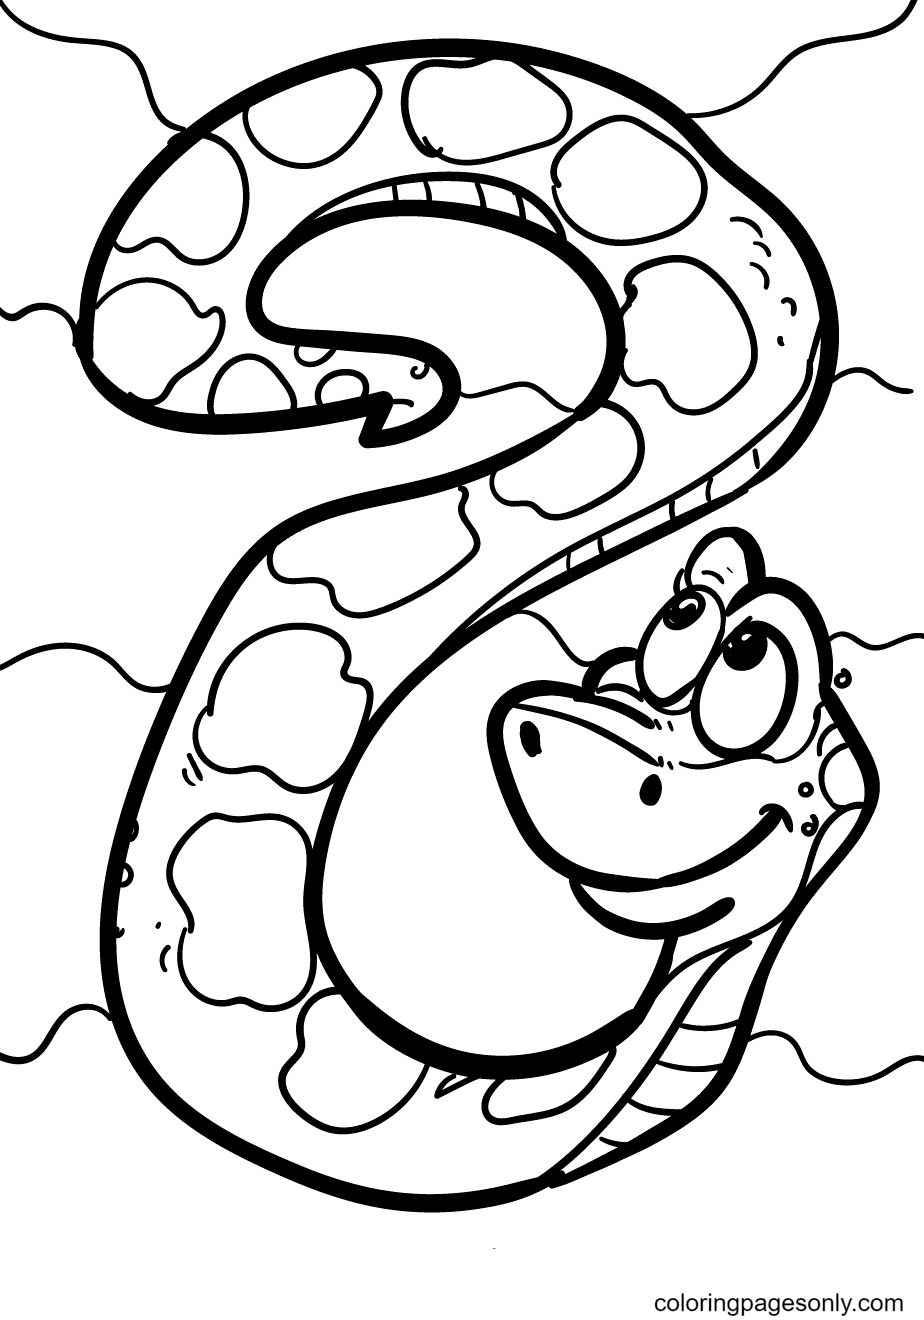 A Friendly Snake Coloring Pages